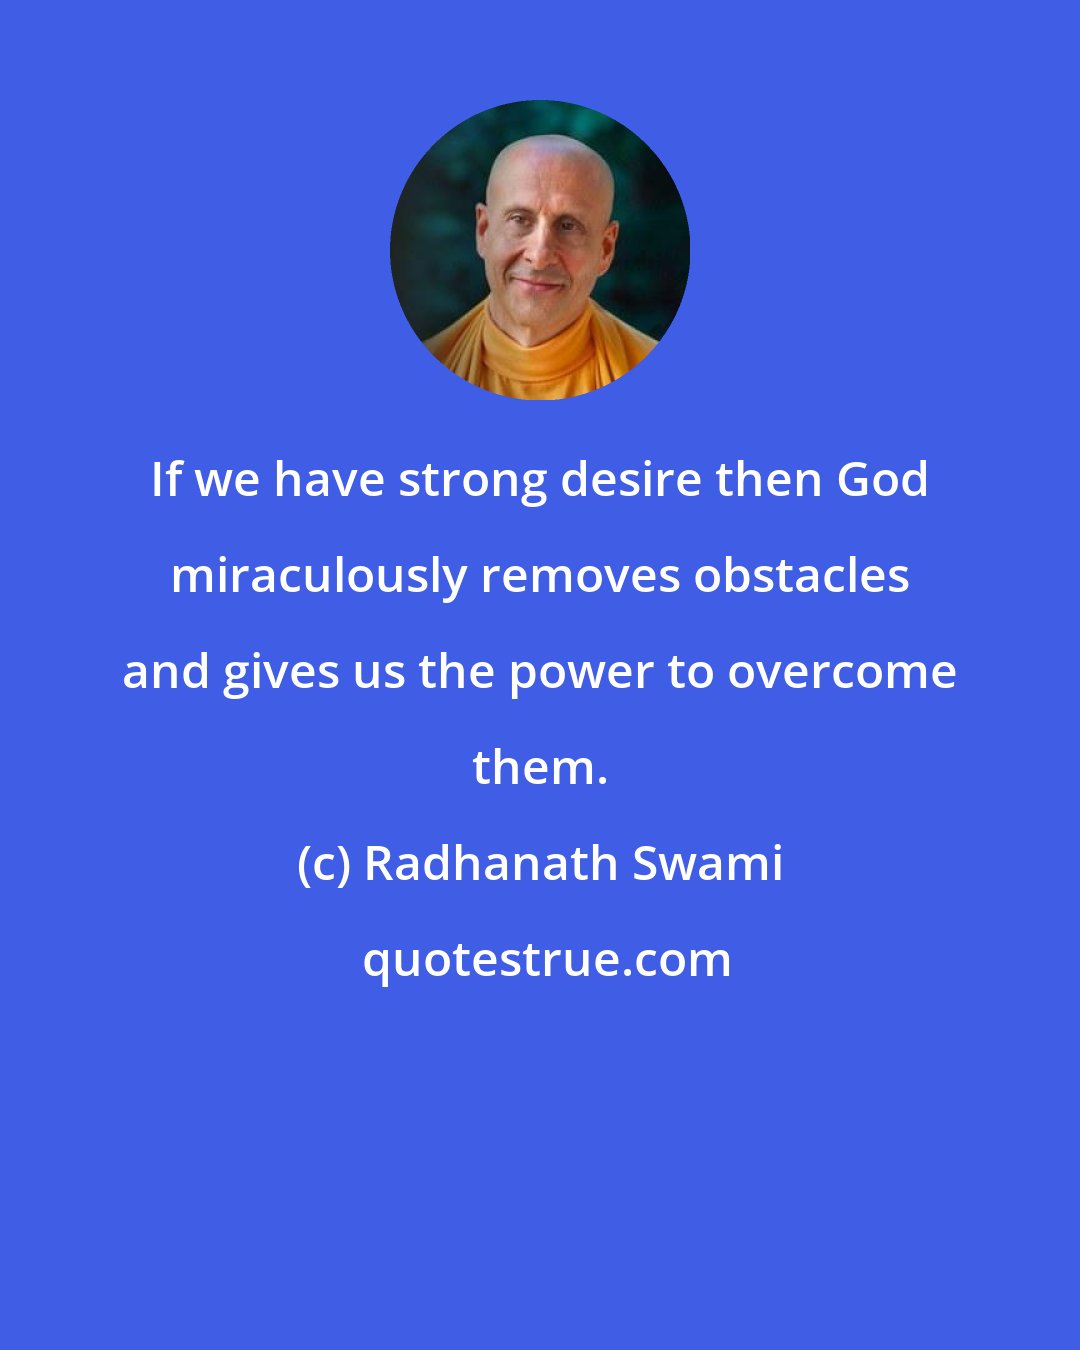 Radhanath Swami: If we have strong desire then God miraculously removes obstacles and gives us the power to overcome them.